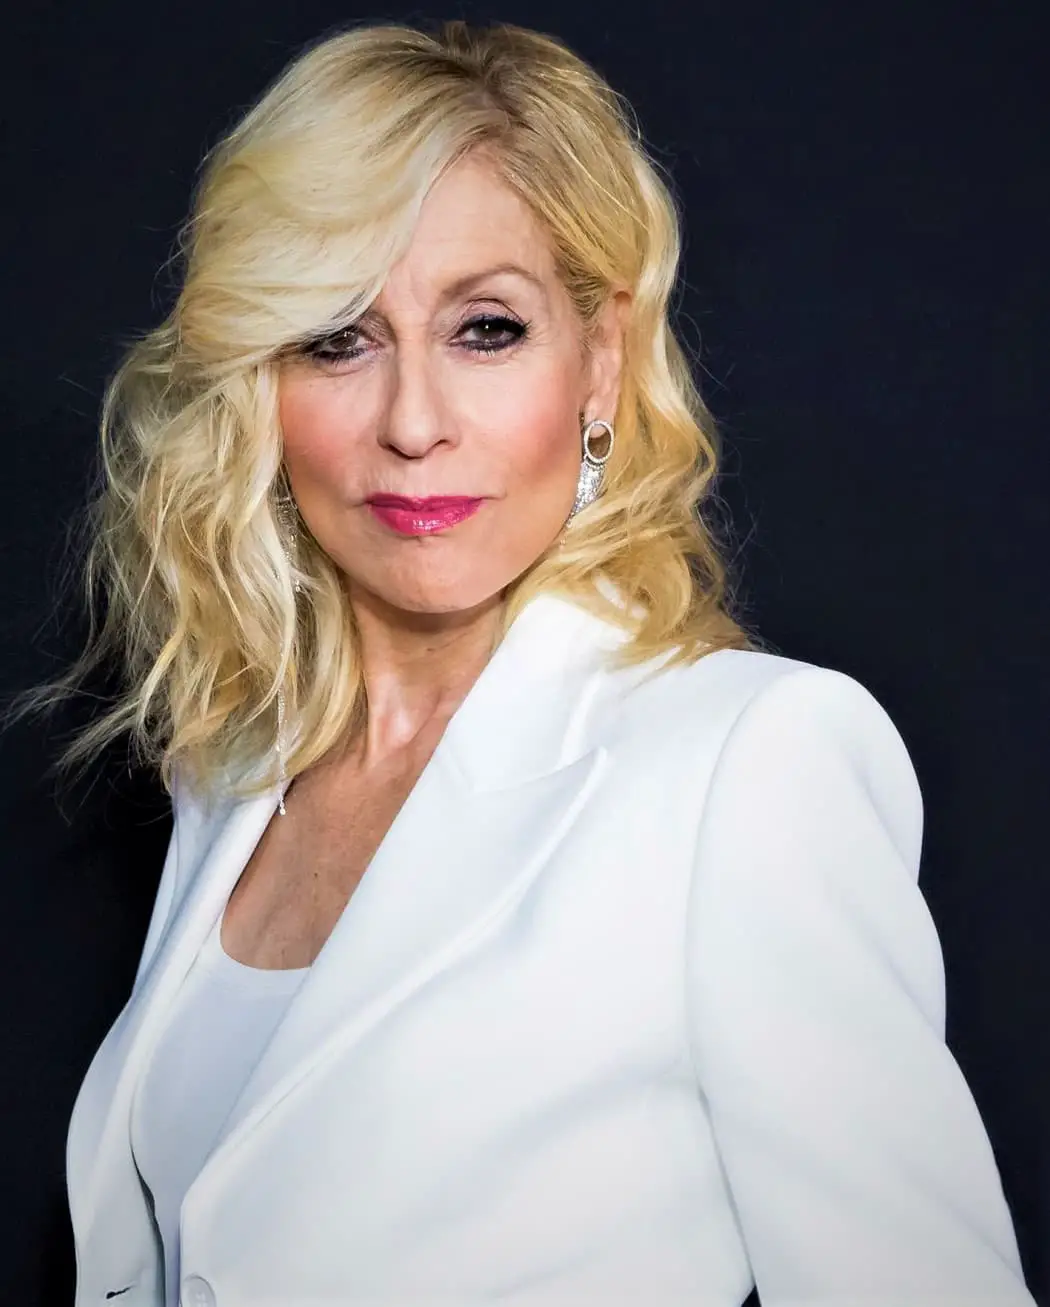 Judith Light Wiki, Age, Height, Husband, Children, Movies, Who's the Boss? and Net Worth